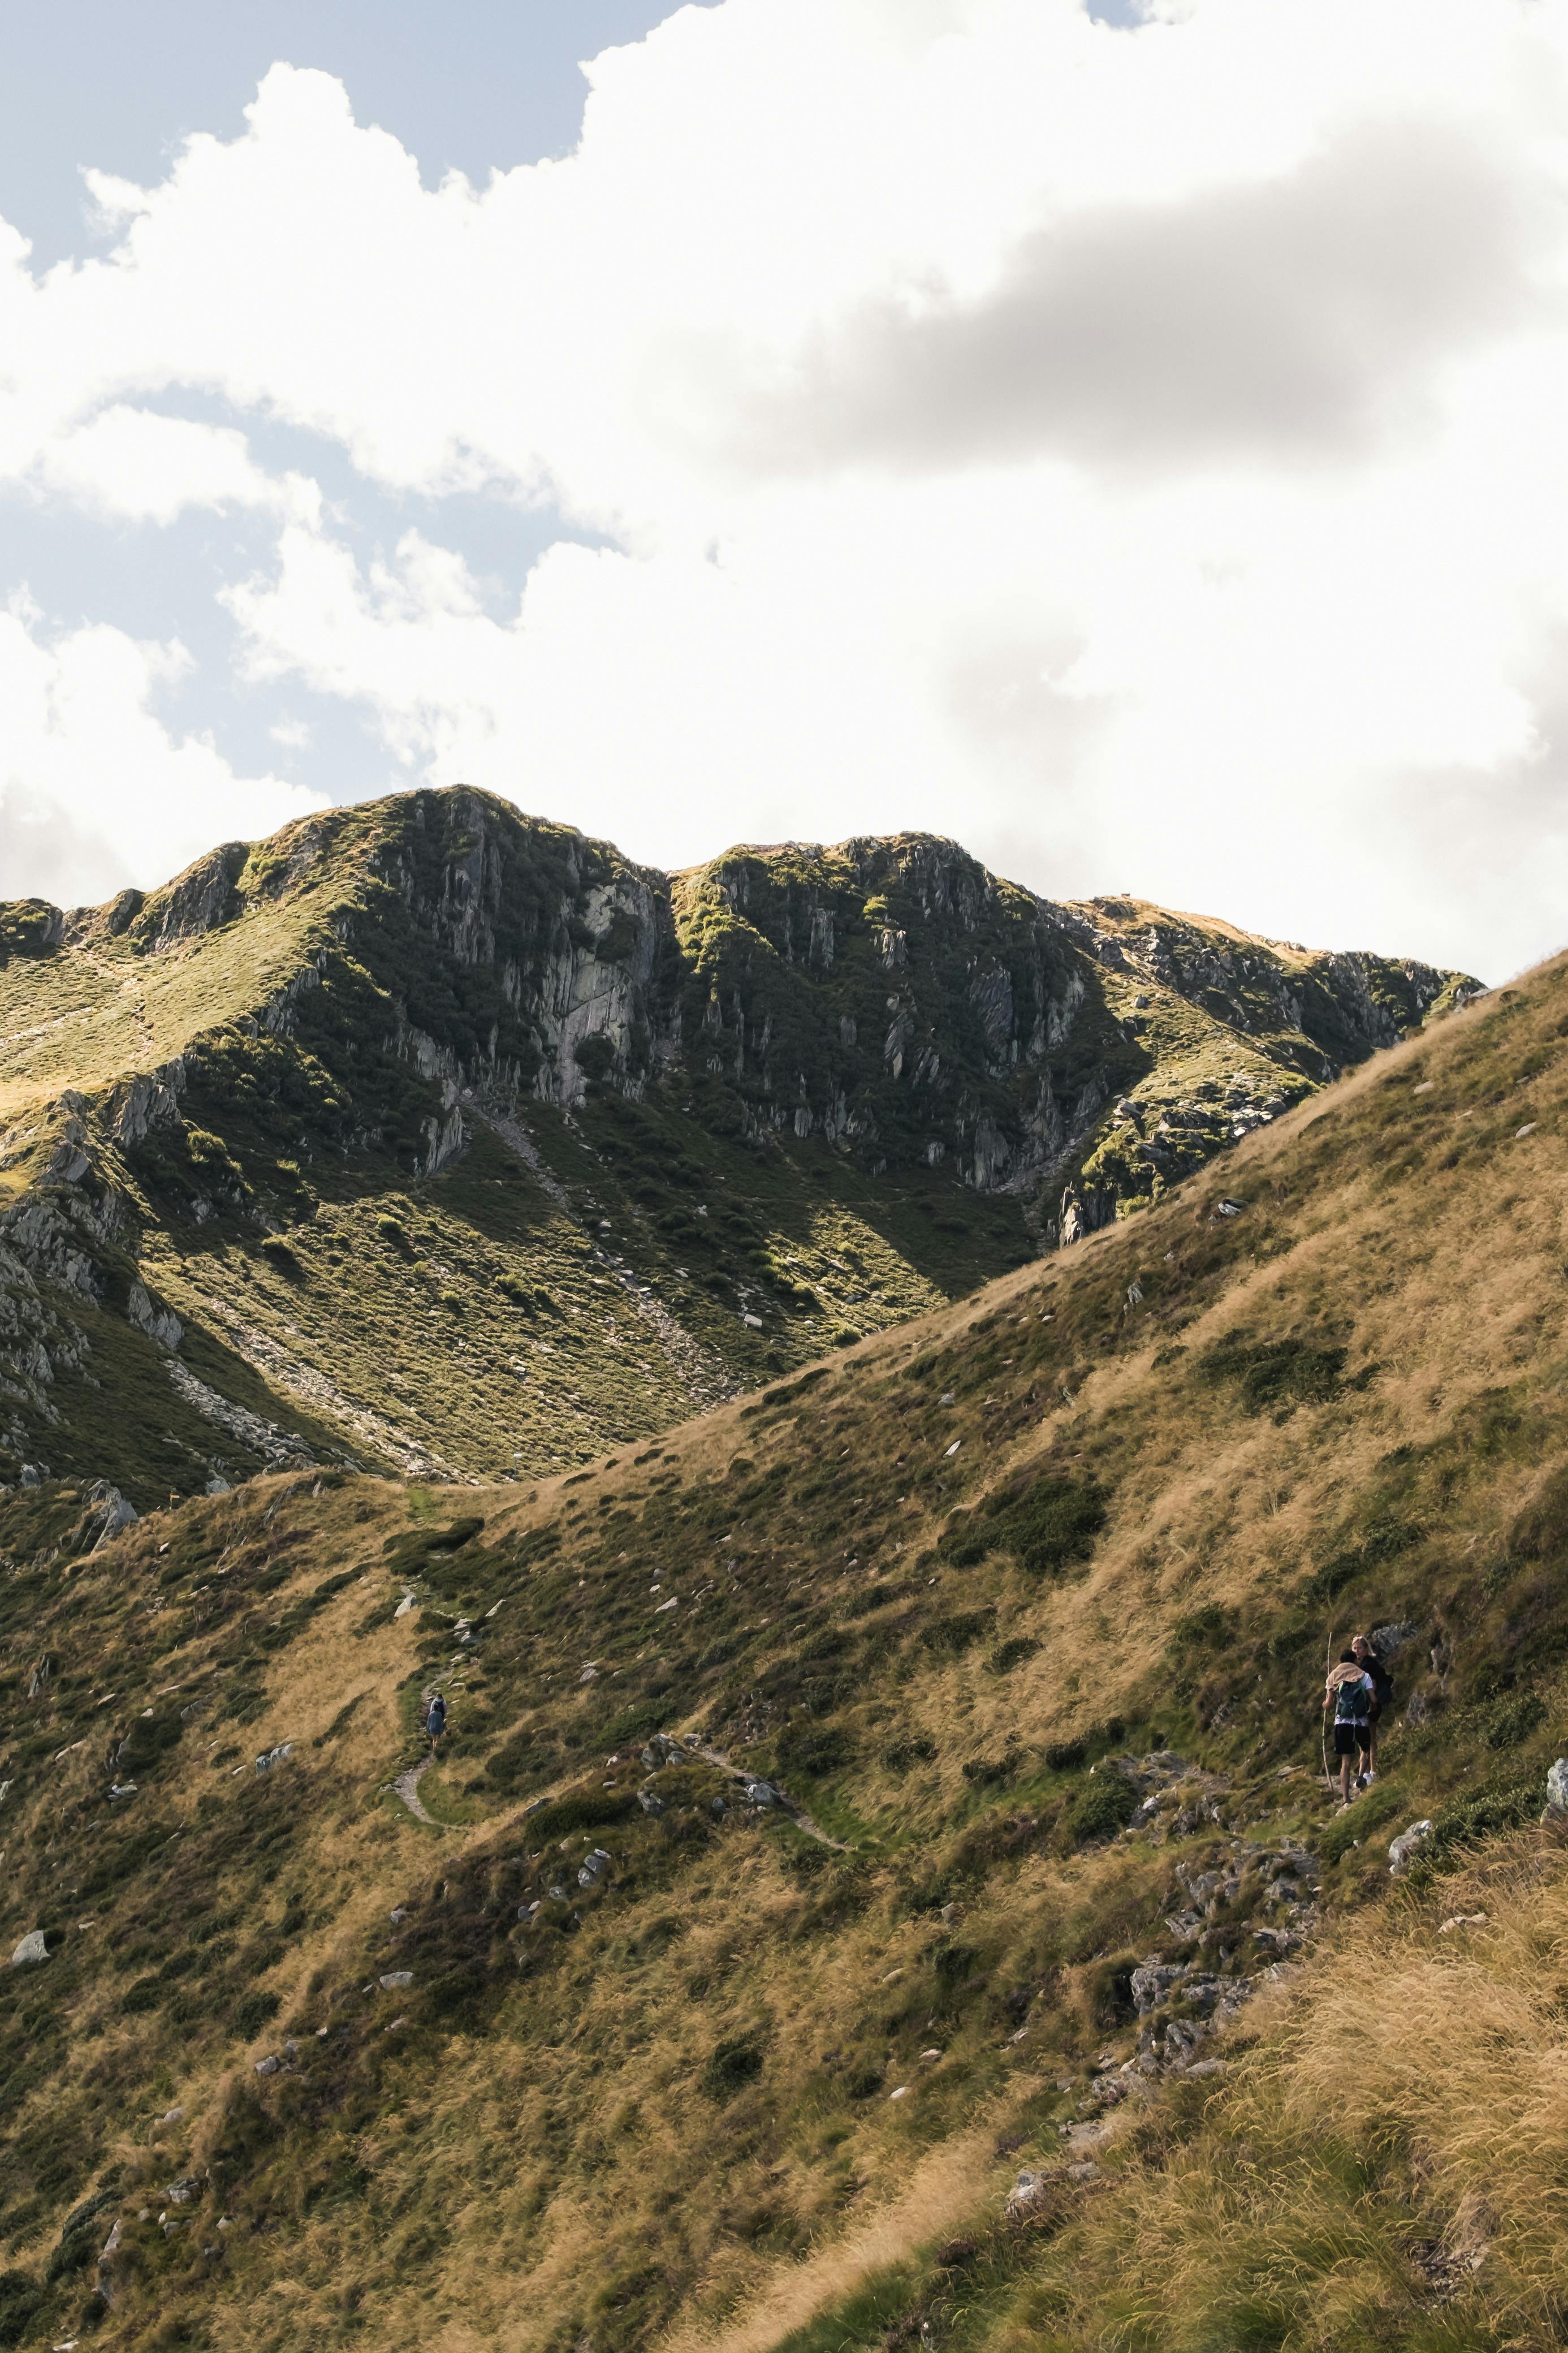 Steep Slope On Rocky Image & Photo (Free Trial)